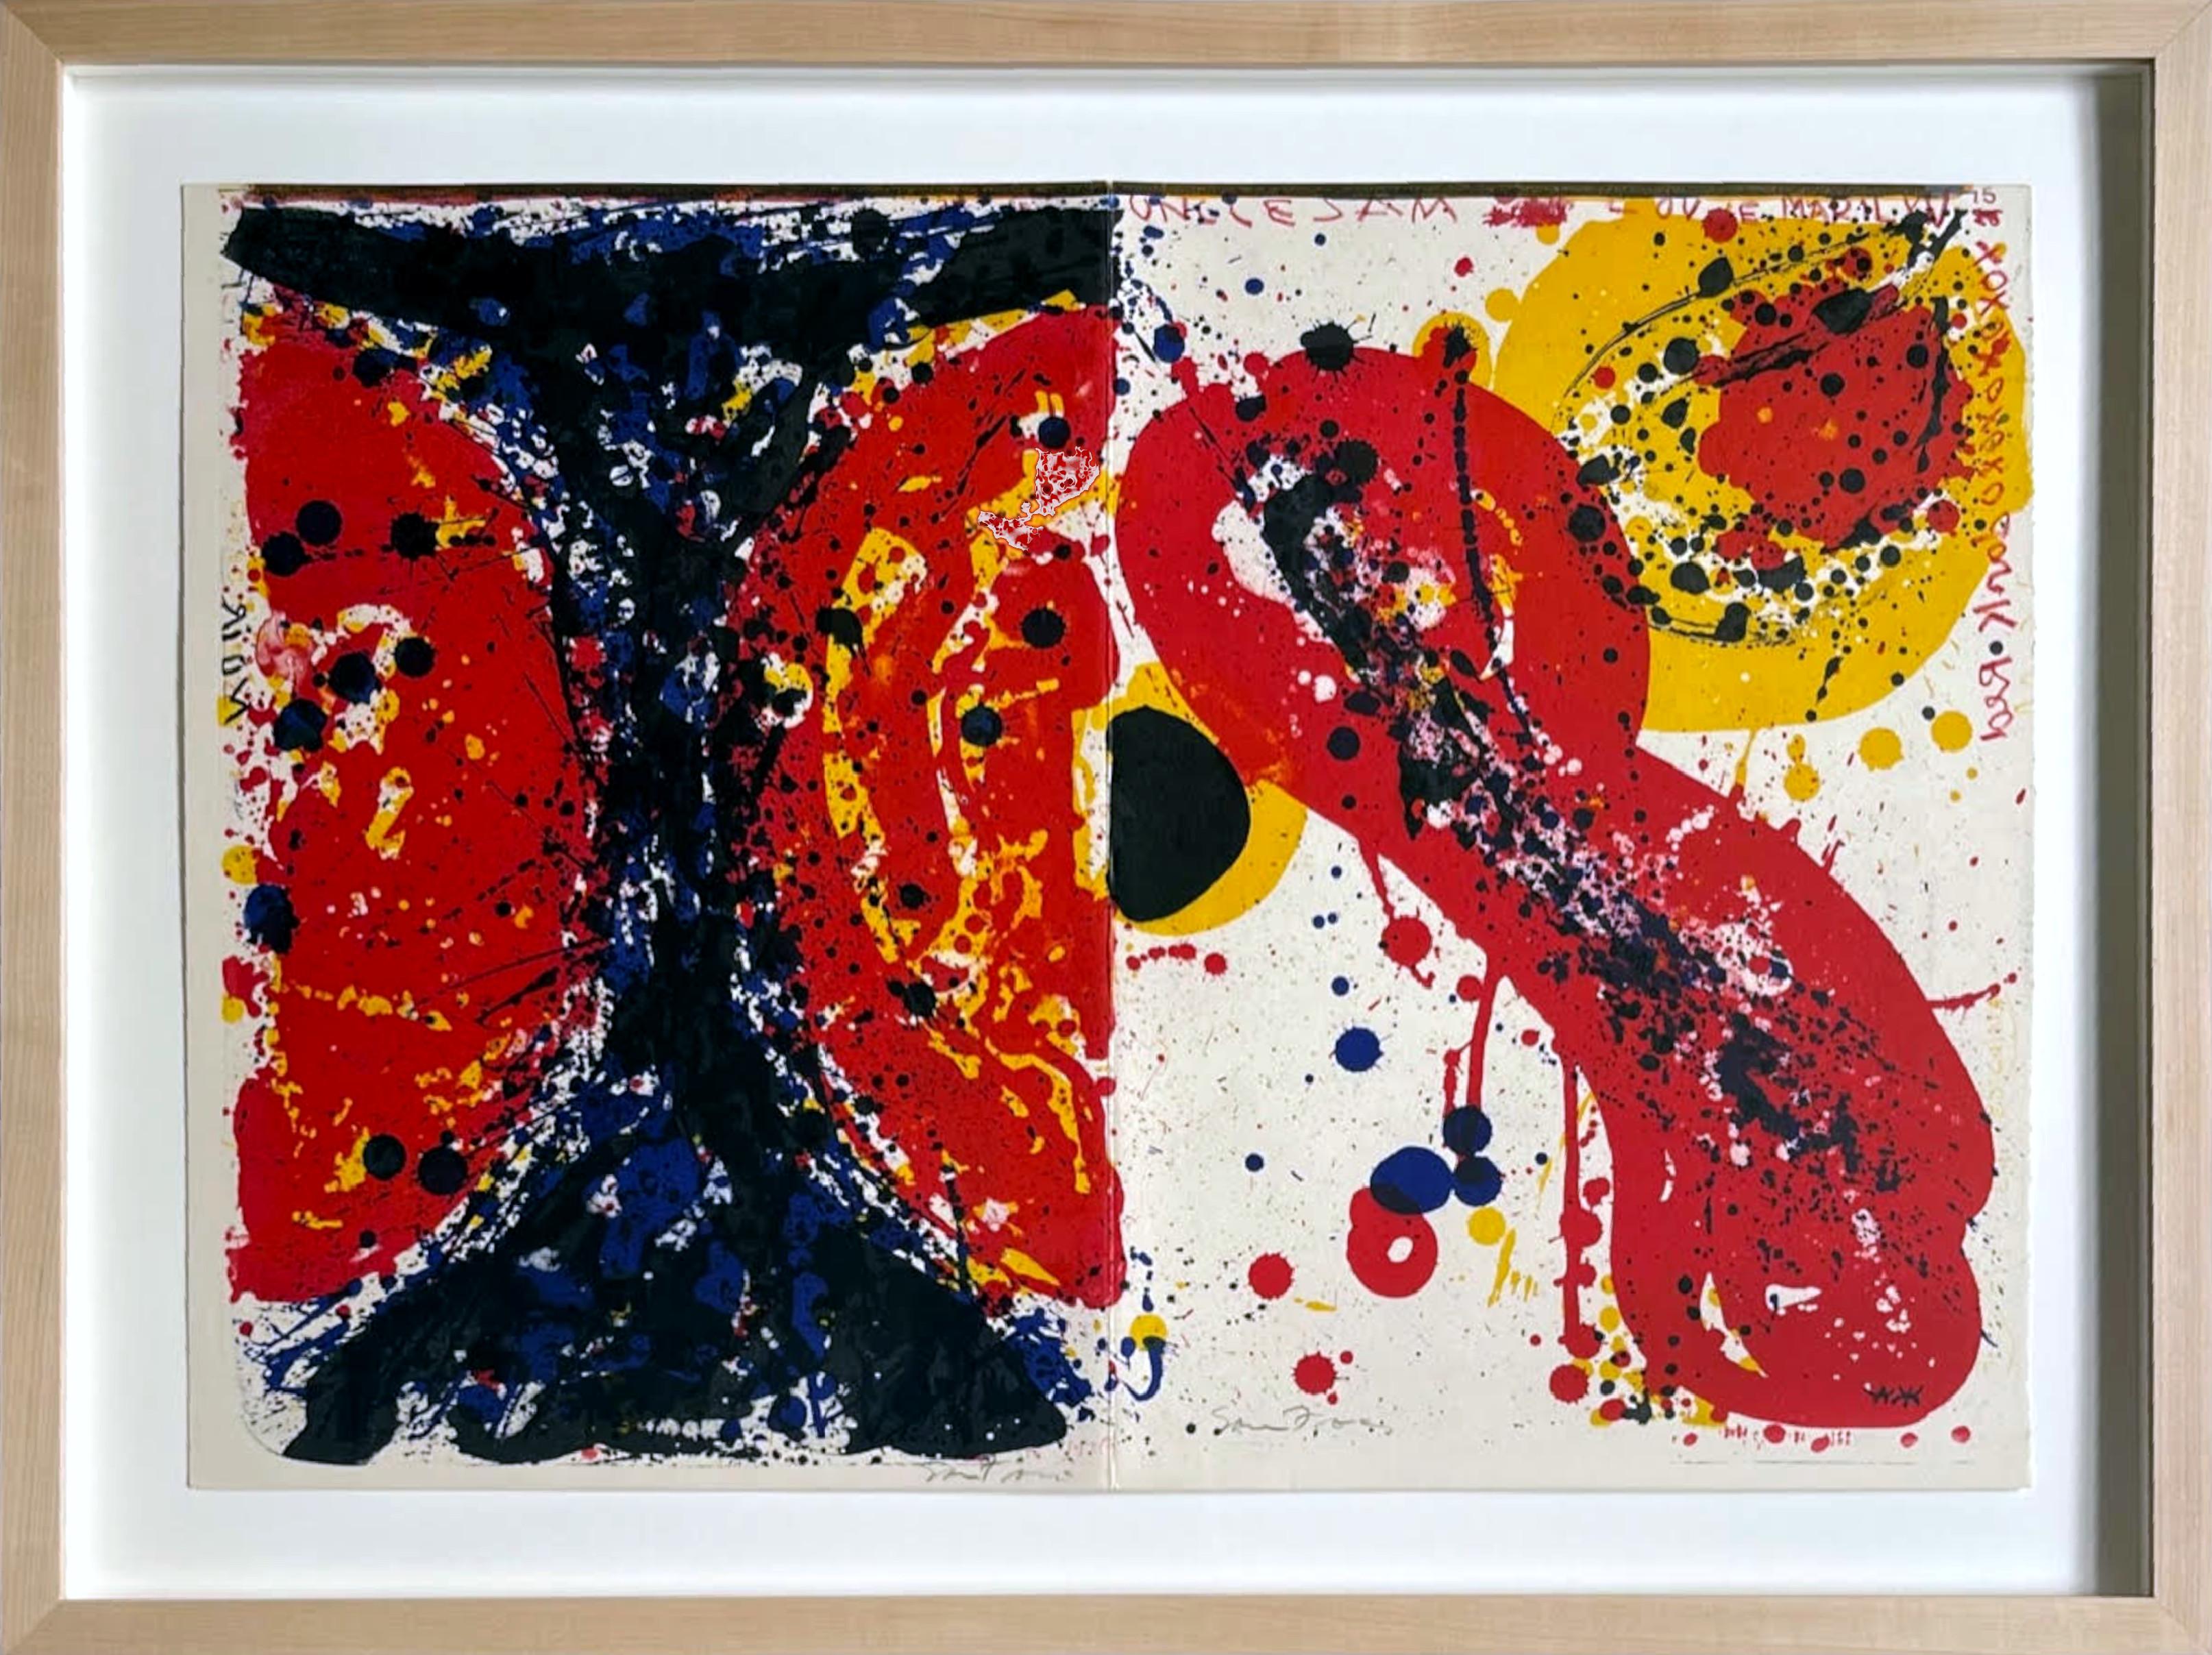 Untitled, from Deluxe Lt Edition of the 1 Cent Life Portfolio HAND SIGNED TWICE  - Print by Sam Francis